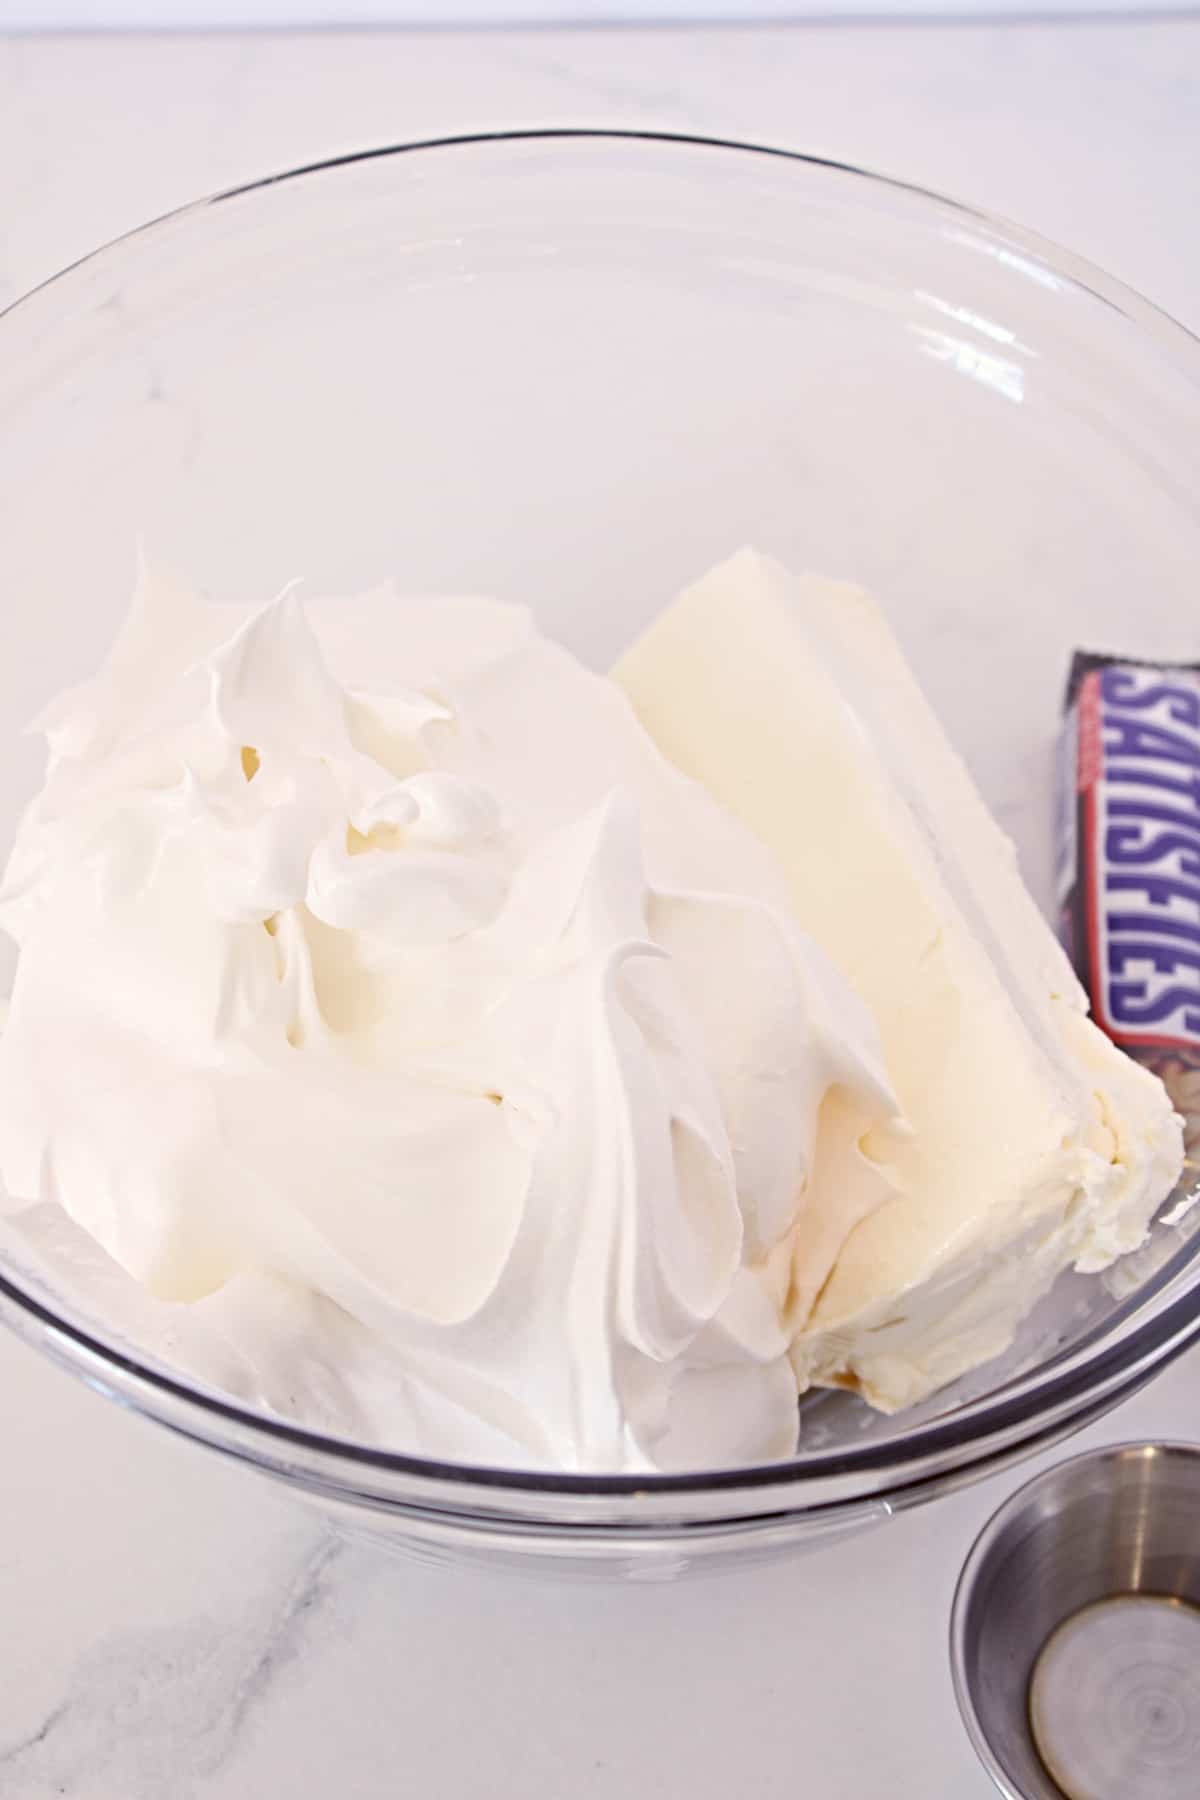 Cream cheese, whipped topping, and vanilla in a mixing bowl.